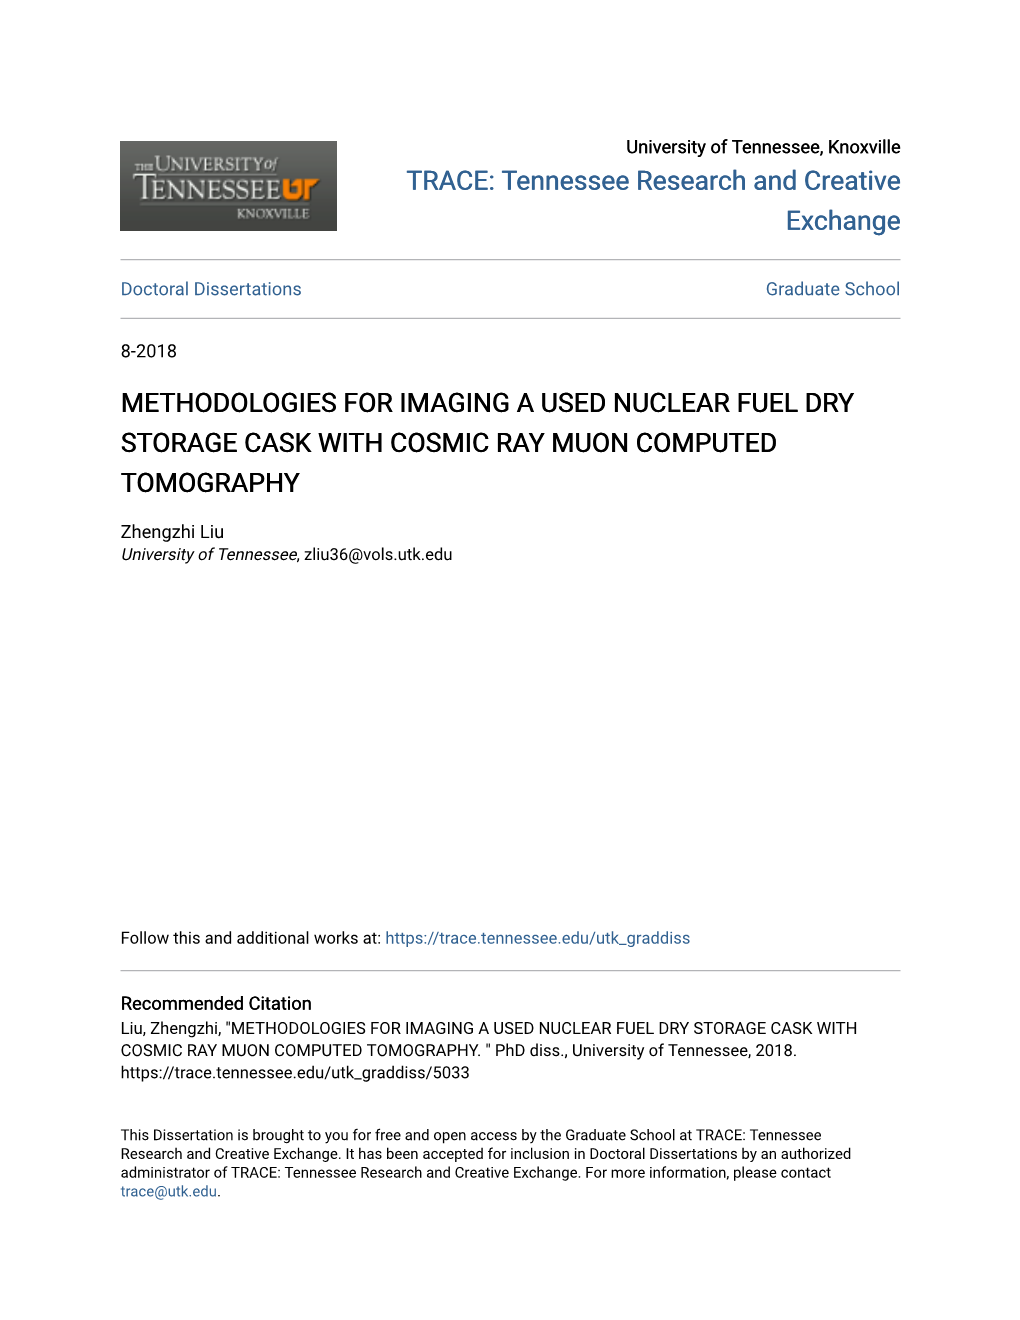 Methodologies for Imaging a Used Nuclear Fuel Dry Storage Cask with Cosmic Ray Muon Computed Tomography